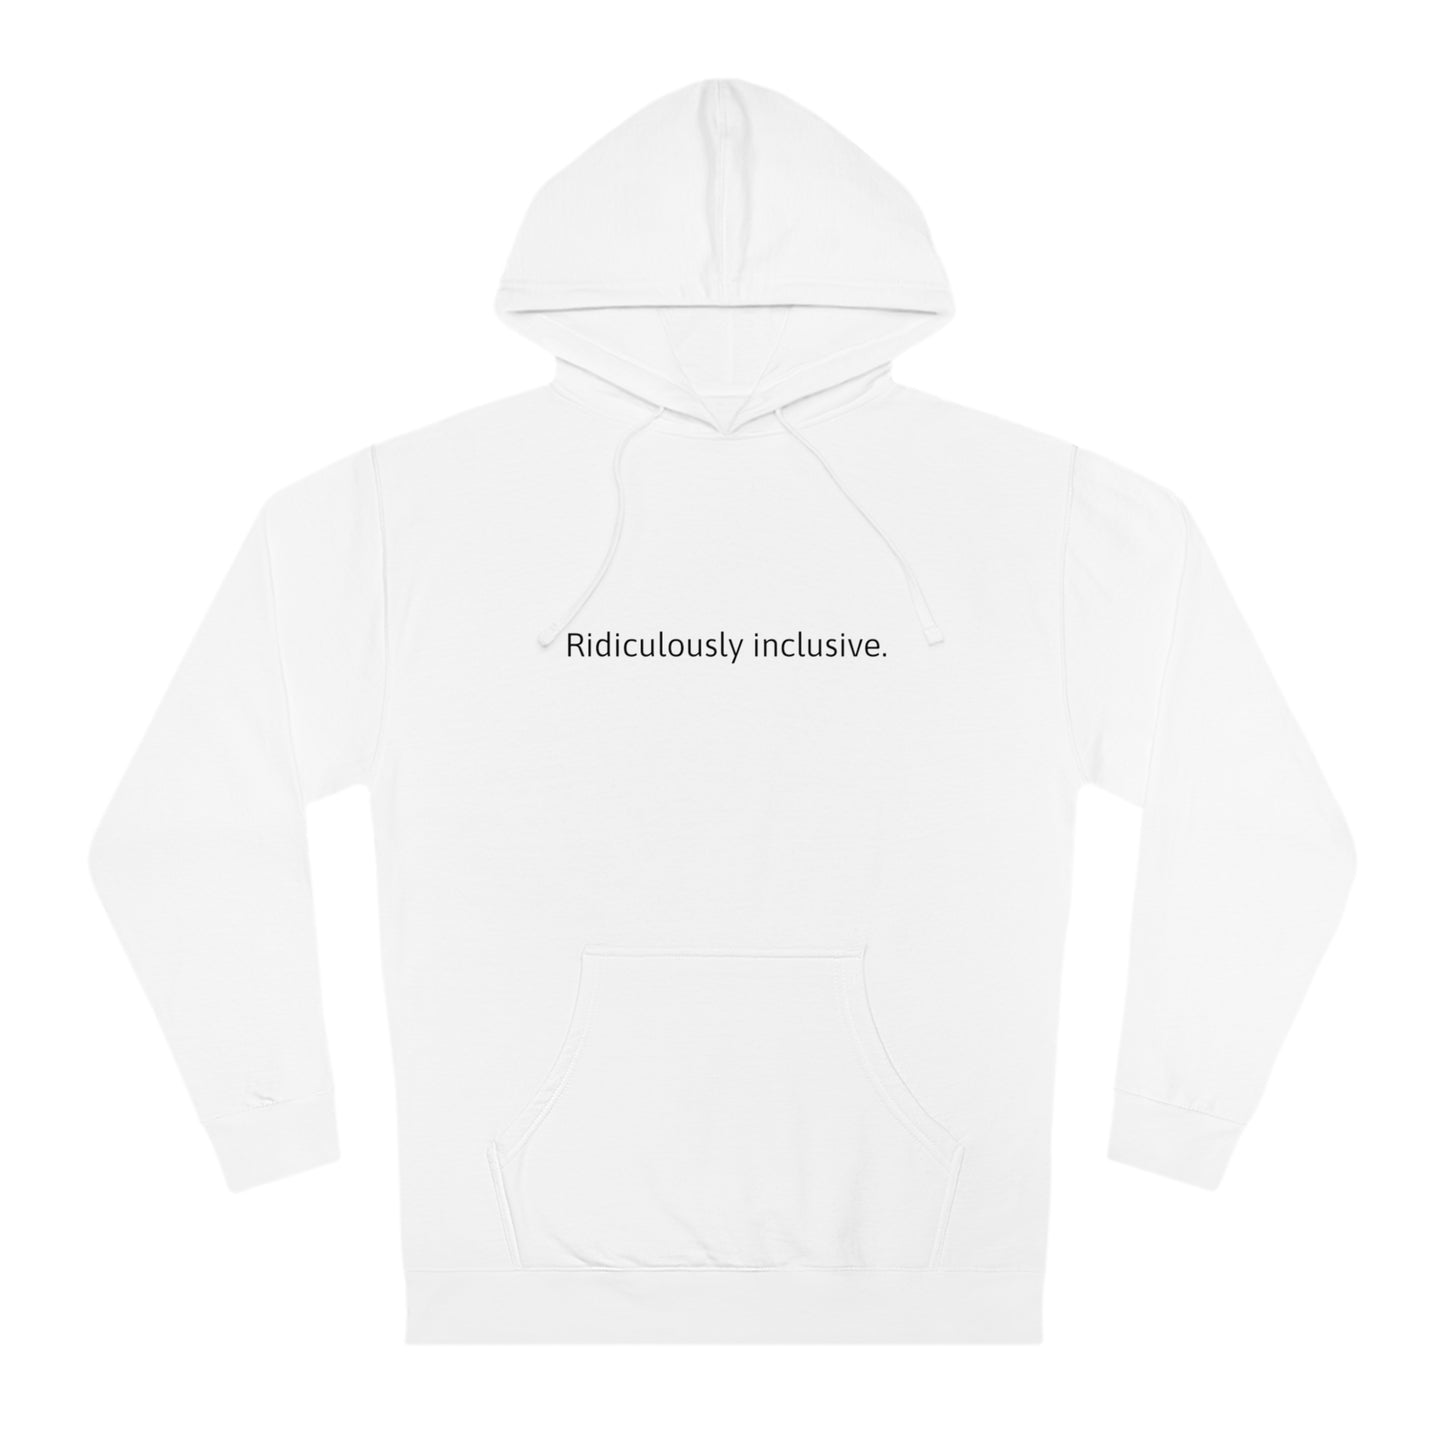 Ridiculously inclusive. Hoodie